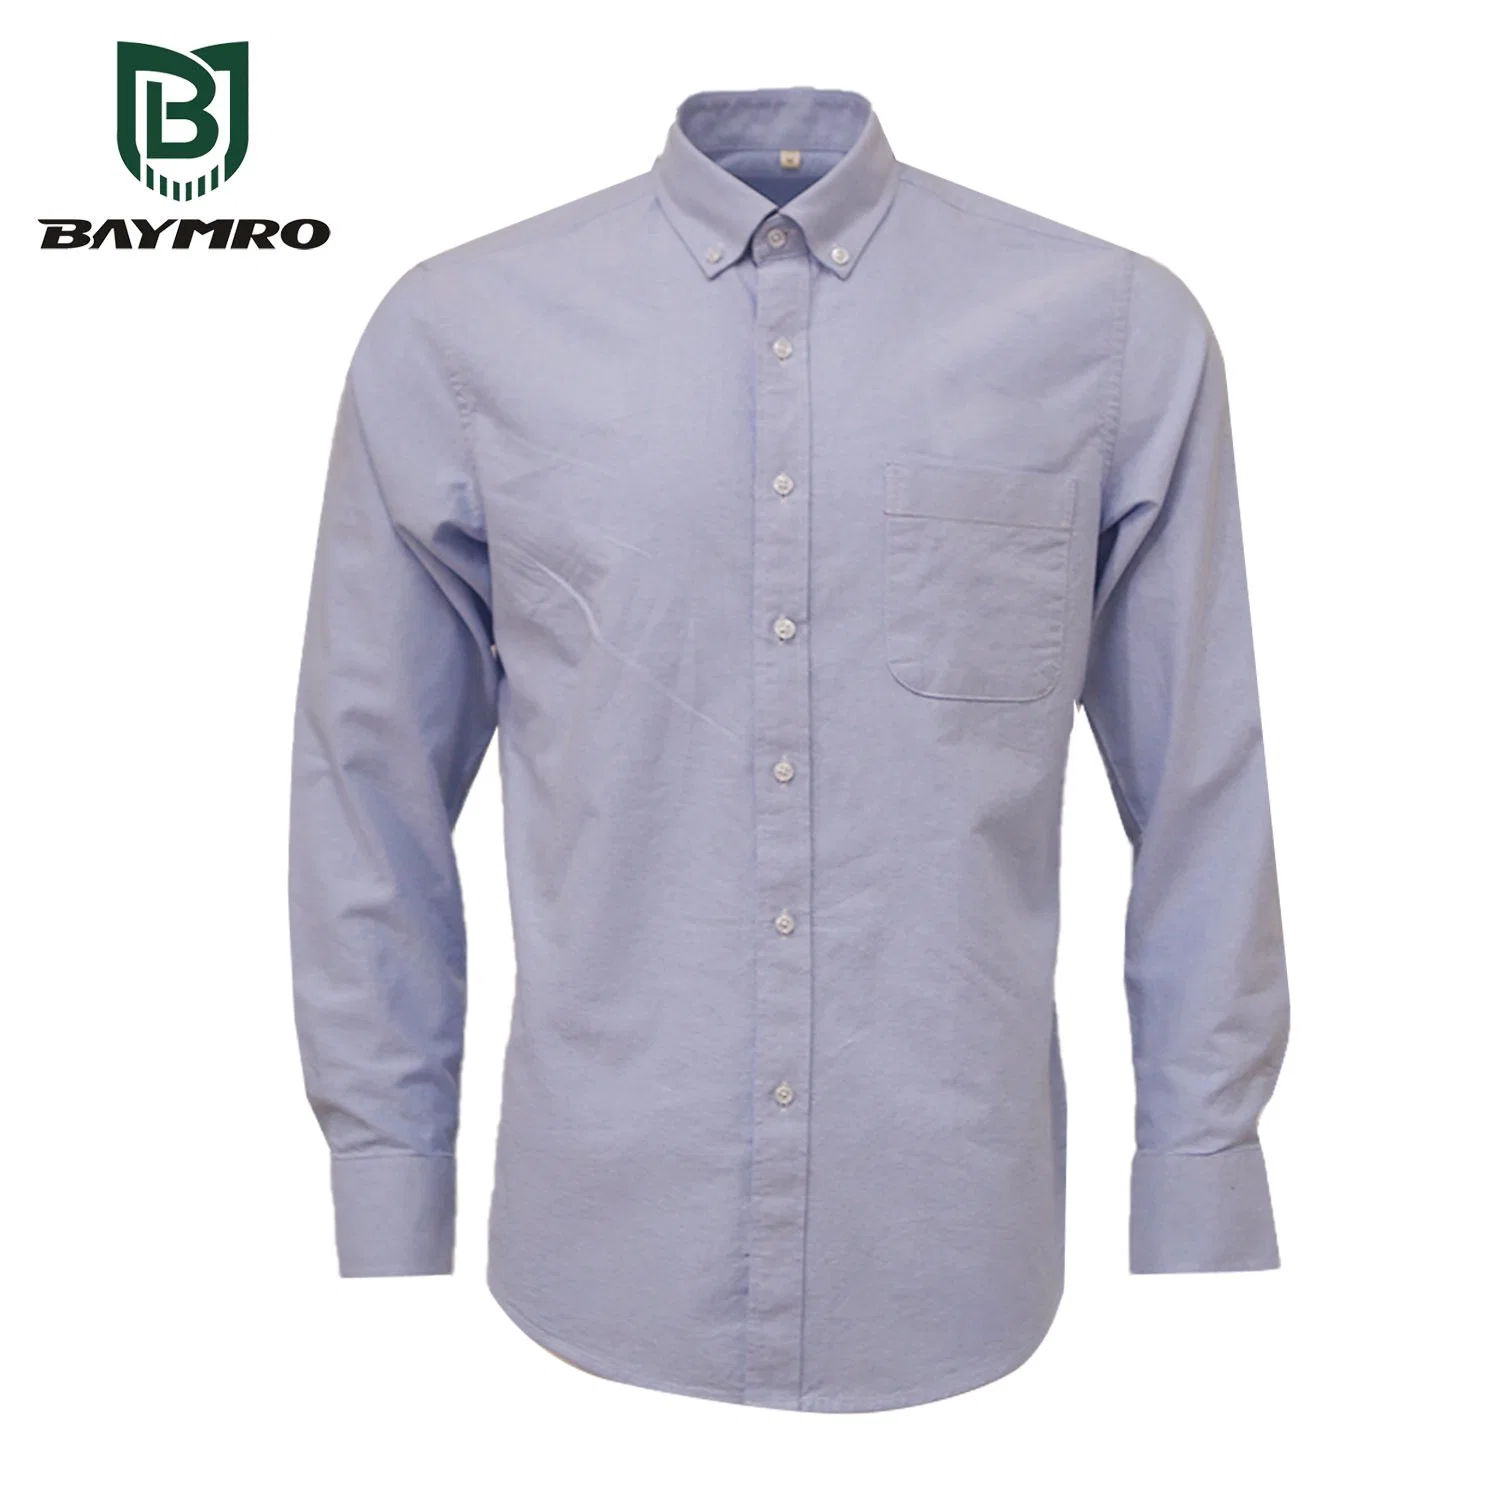 Blue Cotton Comfortable Safety Work Clothing Long Sleeves Shirt Long-Sleeved Shirt PPE Supplier